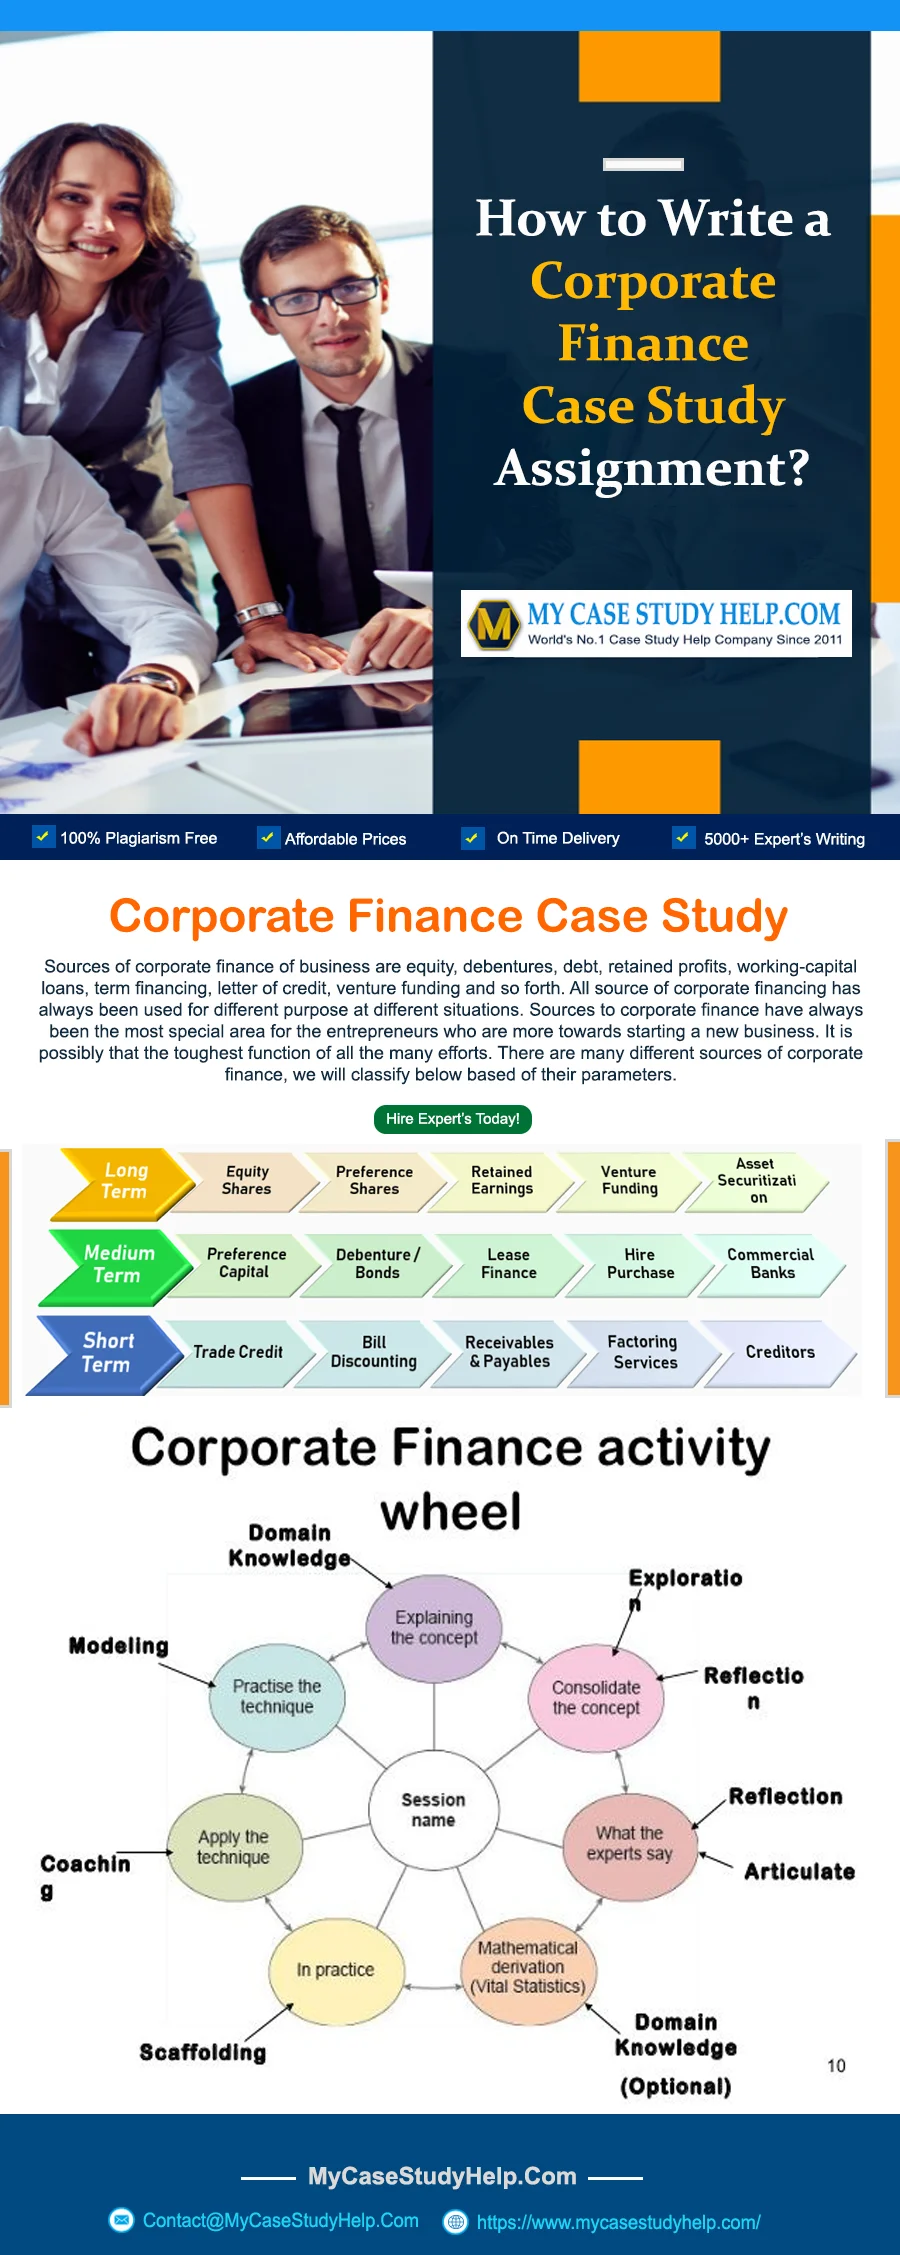 How To Write A Corporate Finance Case Study Assignment?